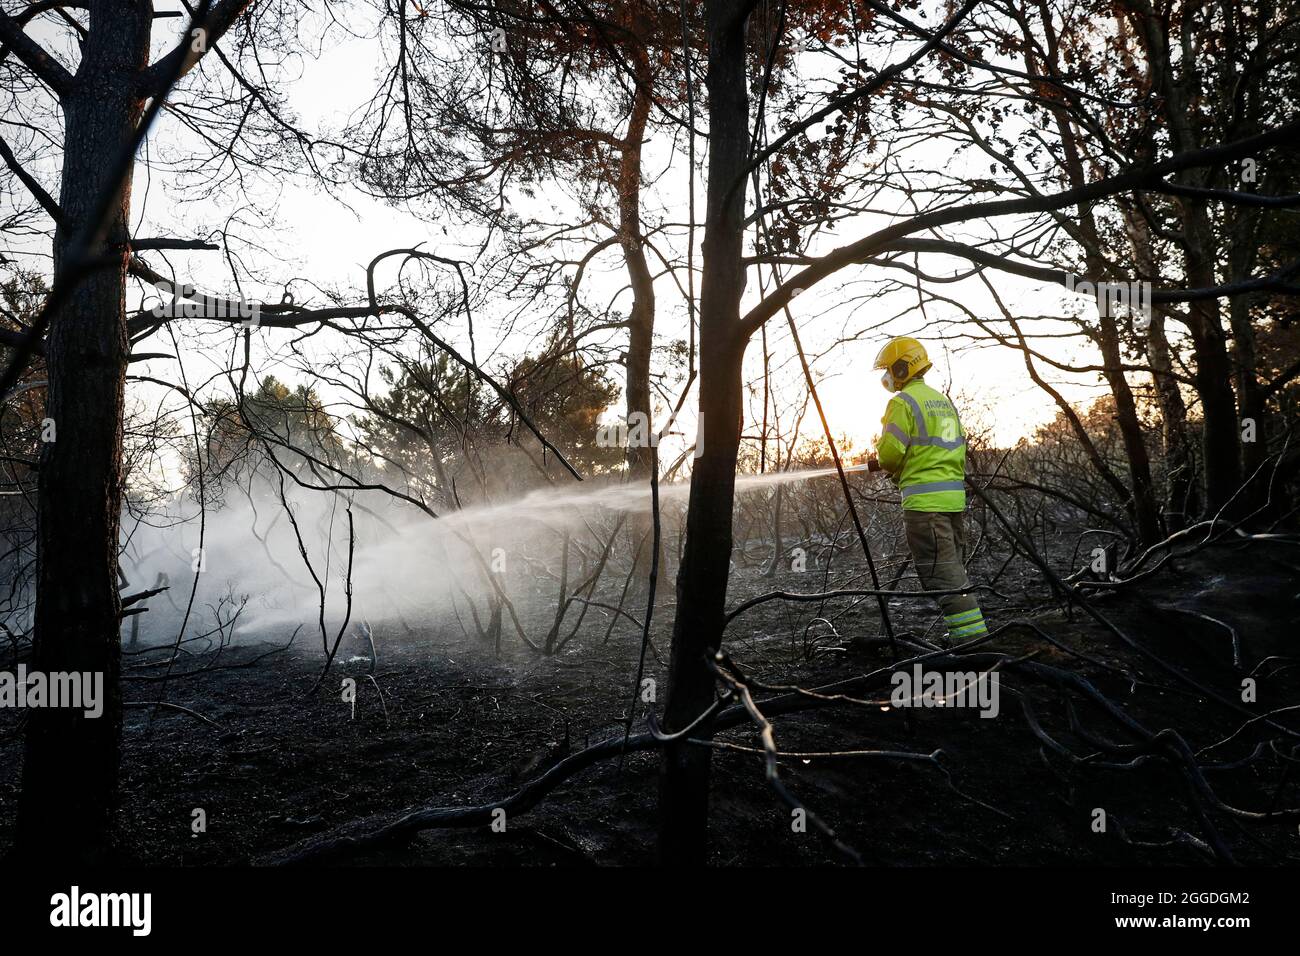 Firefighters from Hampshire Fire and Rescue spray water to douse the flames and put out a wildfire on heathland near Yateley. Stock Photo